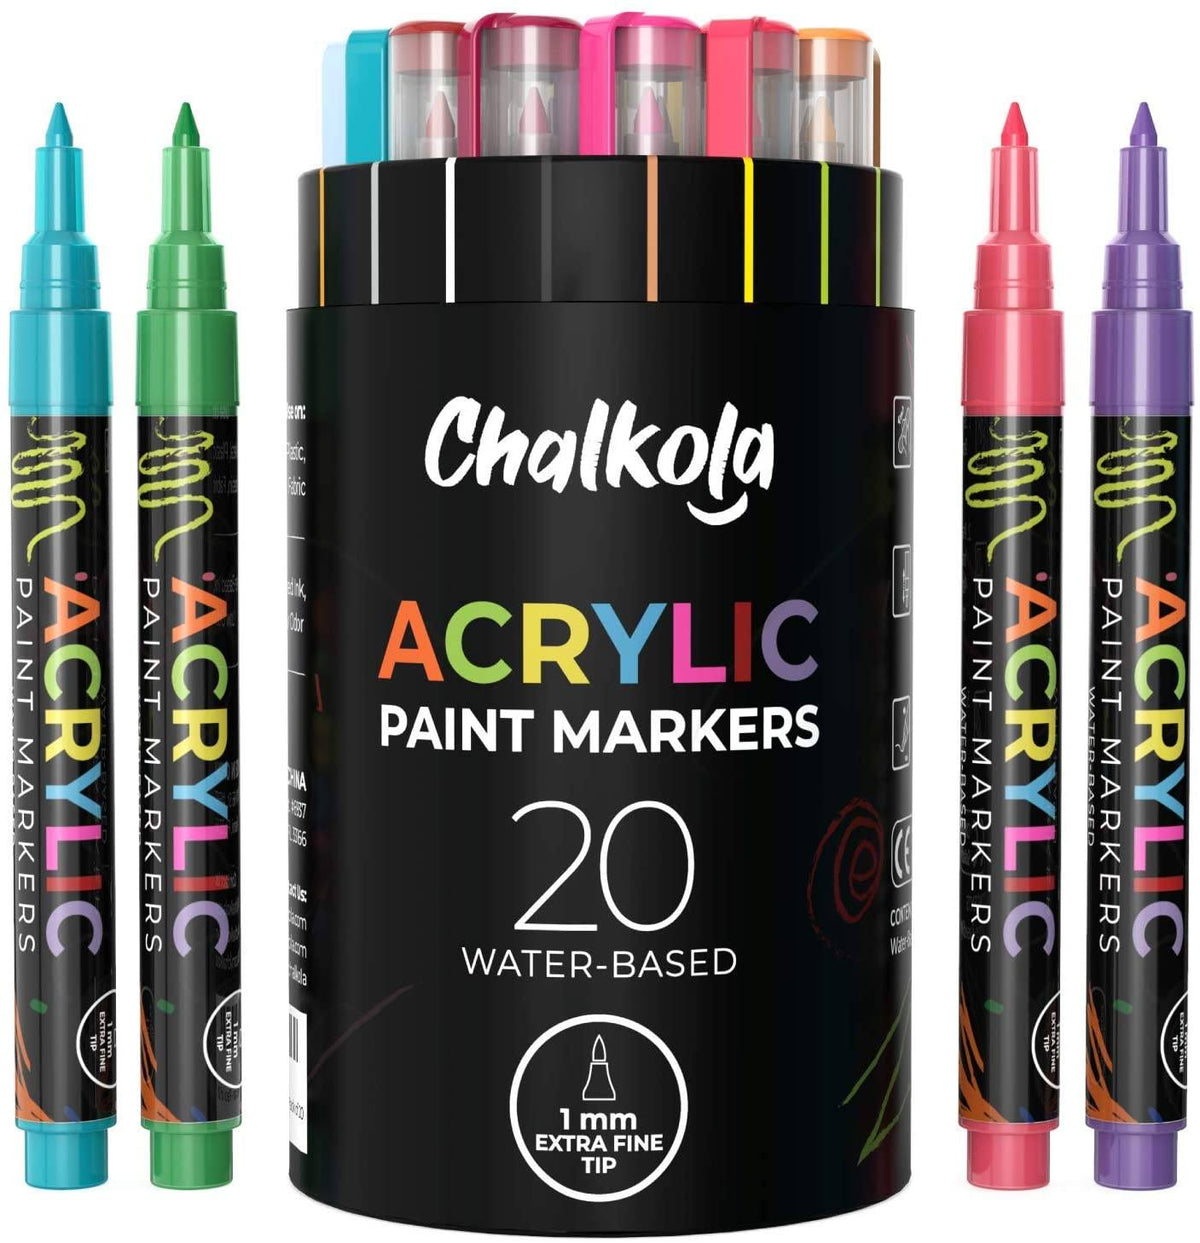 Acrylic Paint Marker Pens - Pack of 20, Fine Tip 1mm Extra Fine 